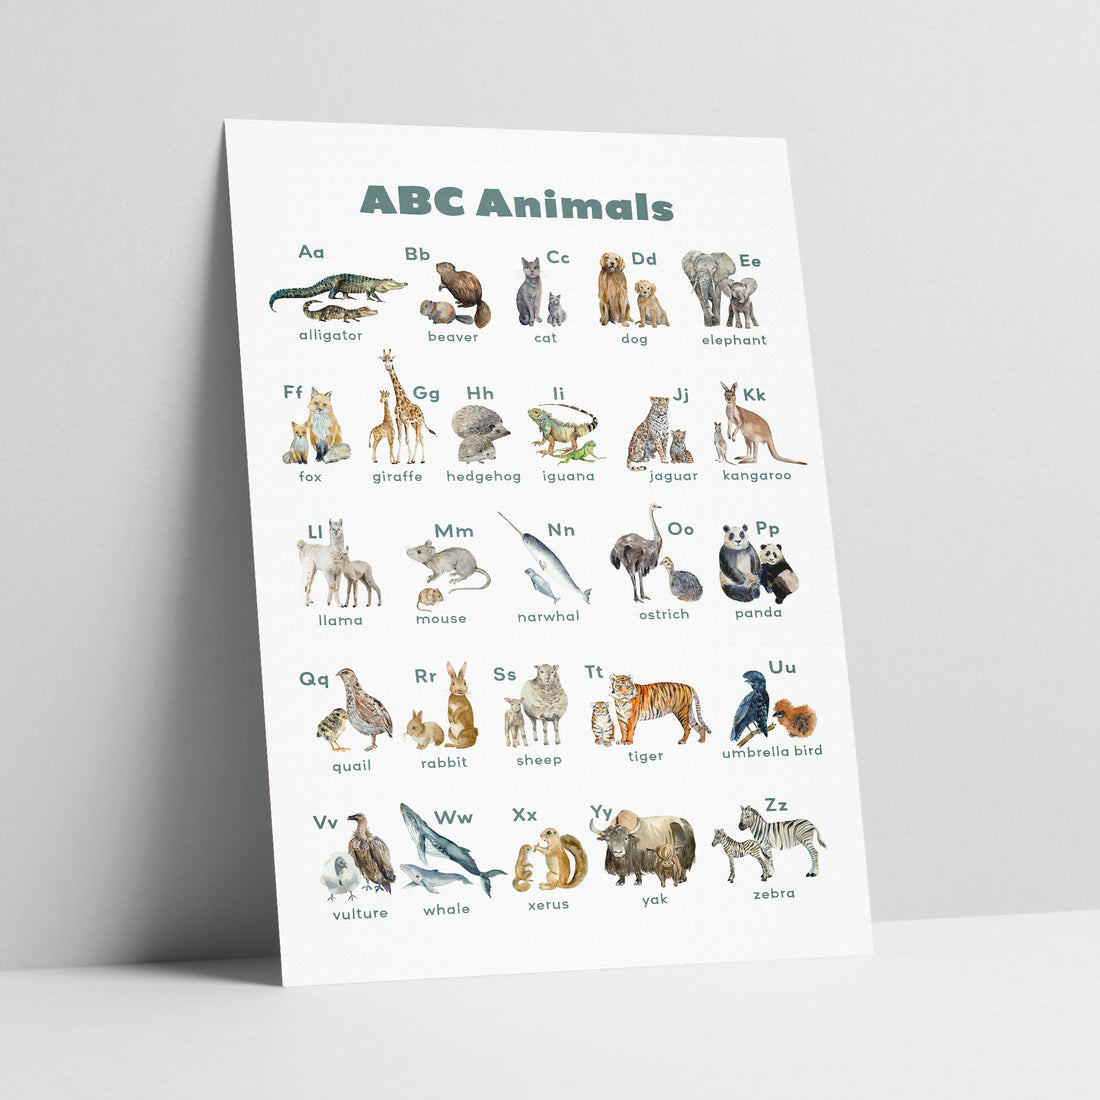 ABC Animals - Educational ABC Poster with Animal Names